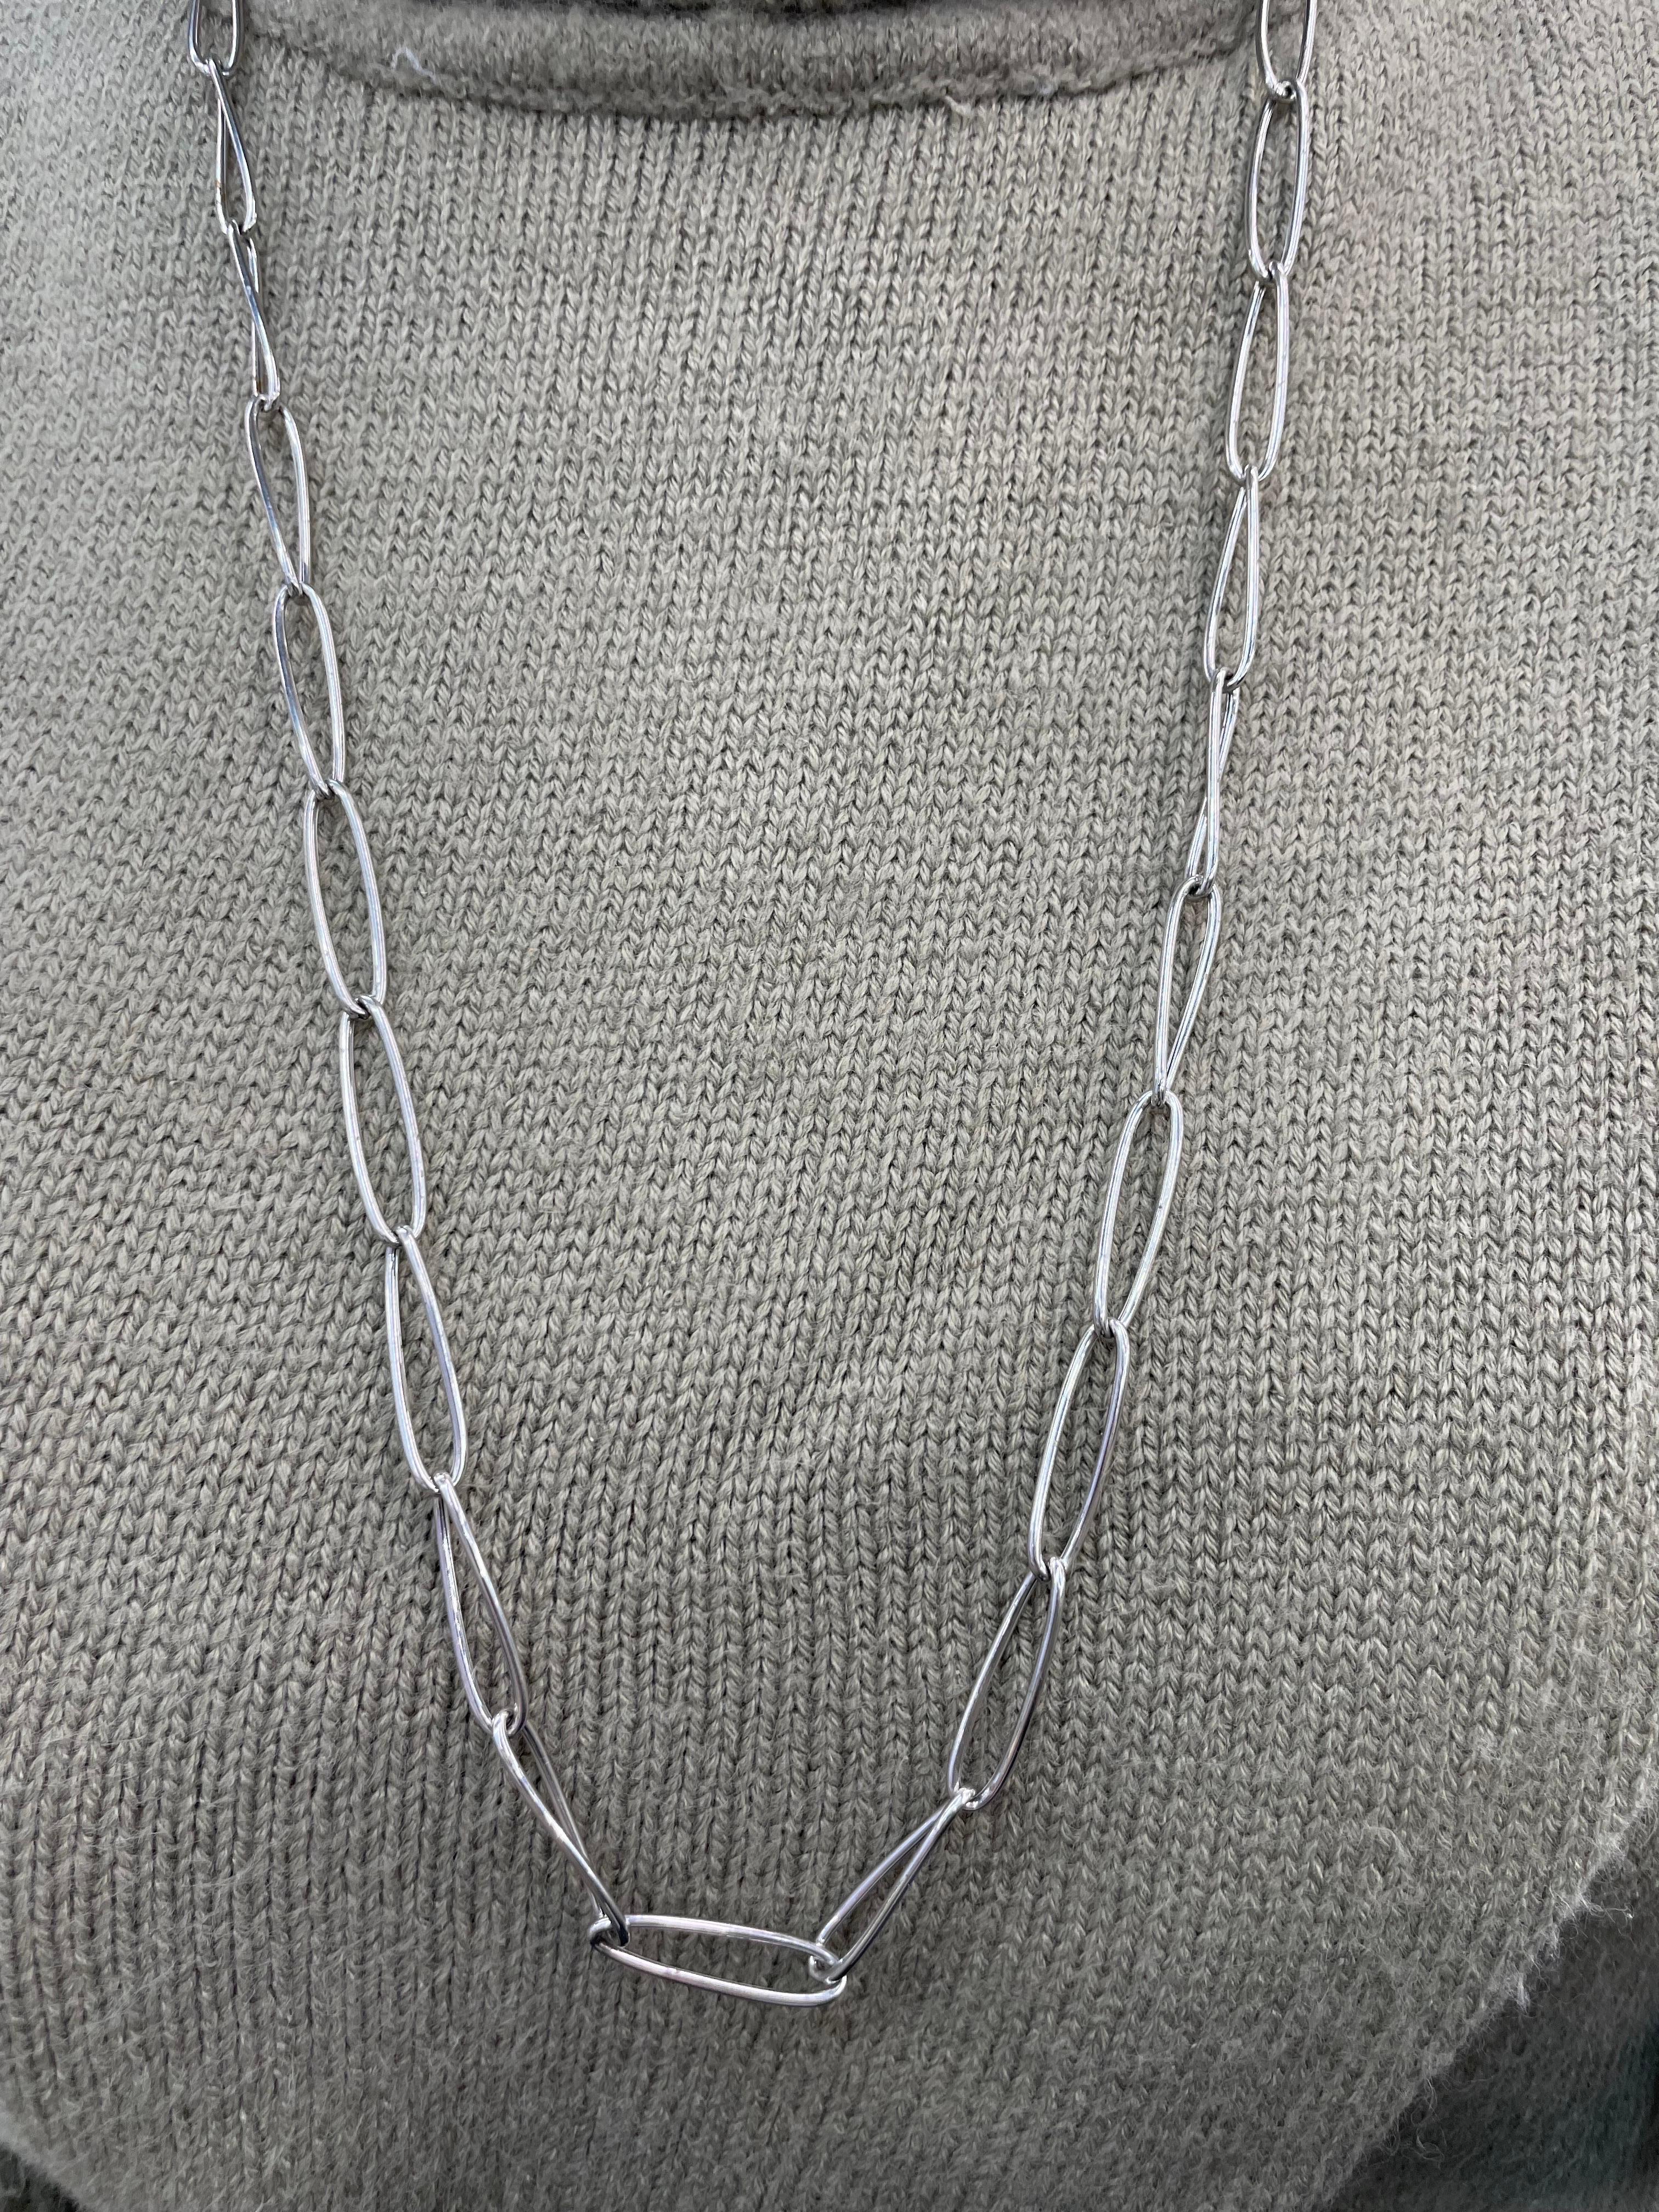 Italian 14 Karat White Gold Oval Link Necklace 17.7 Grams In Excellent Condition For Sale In New York, NY